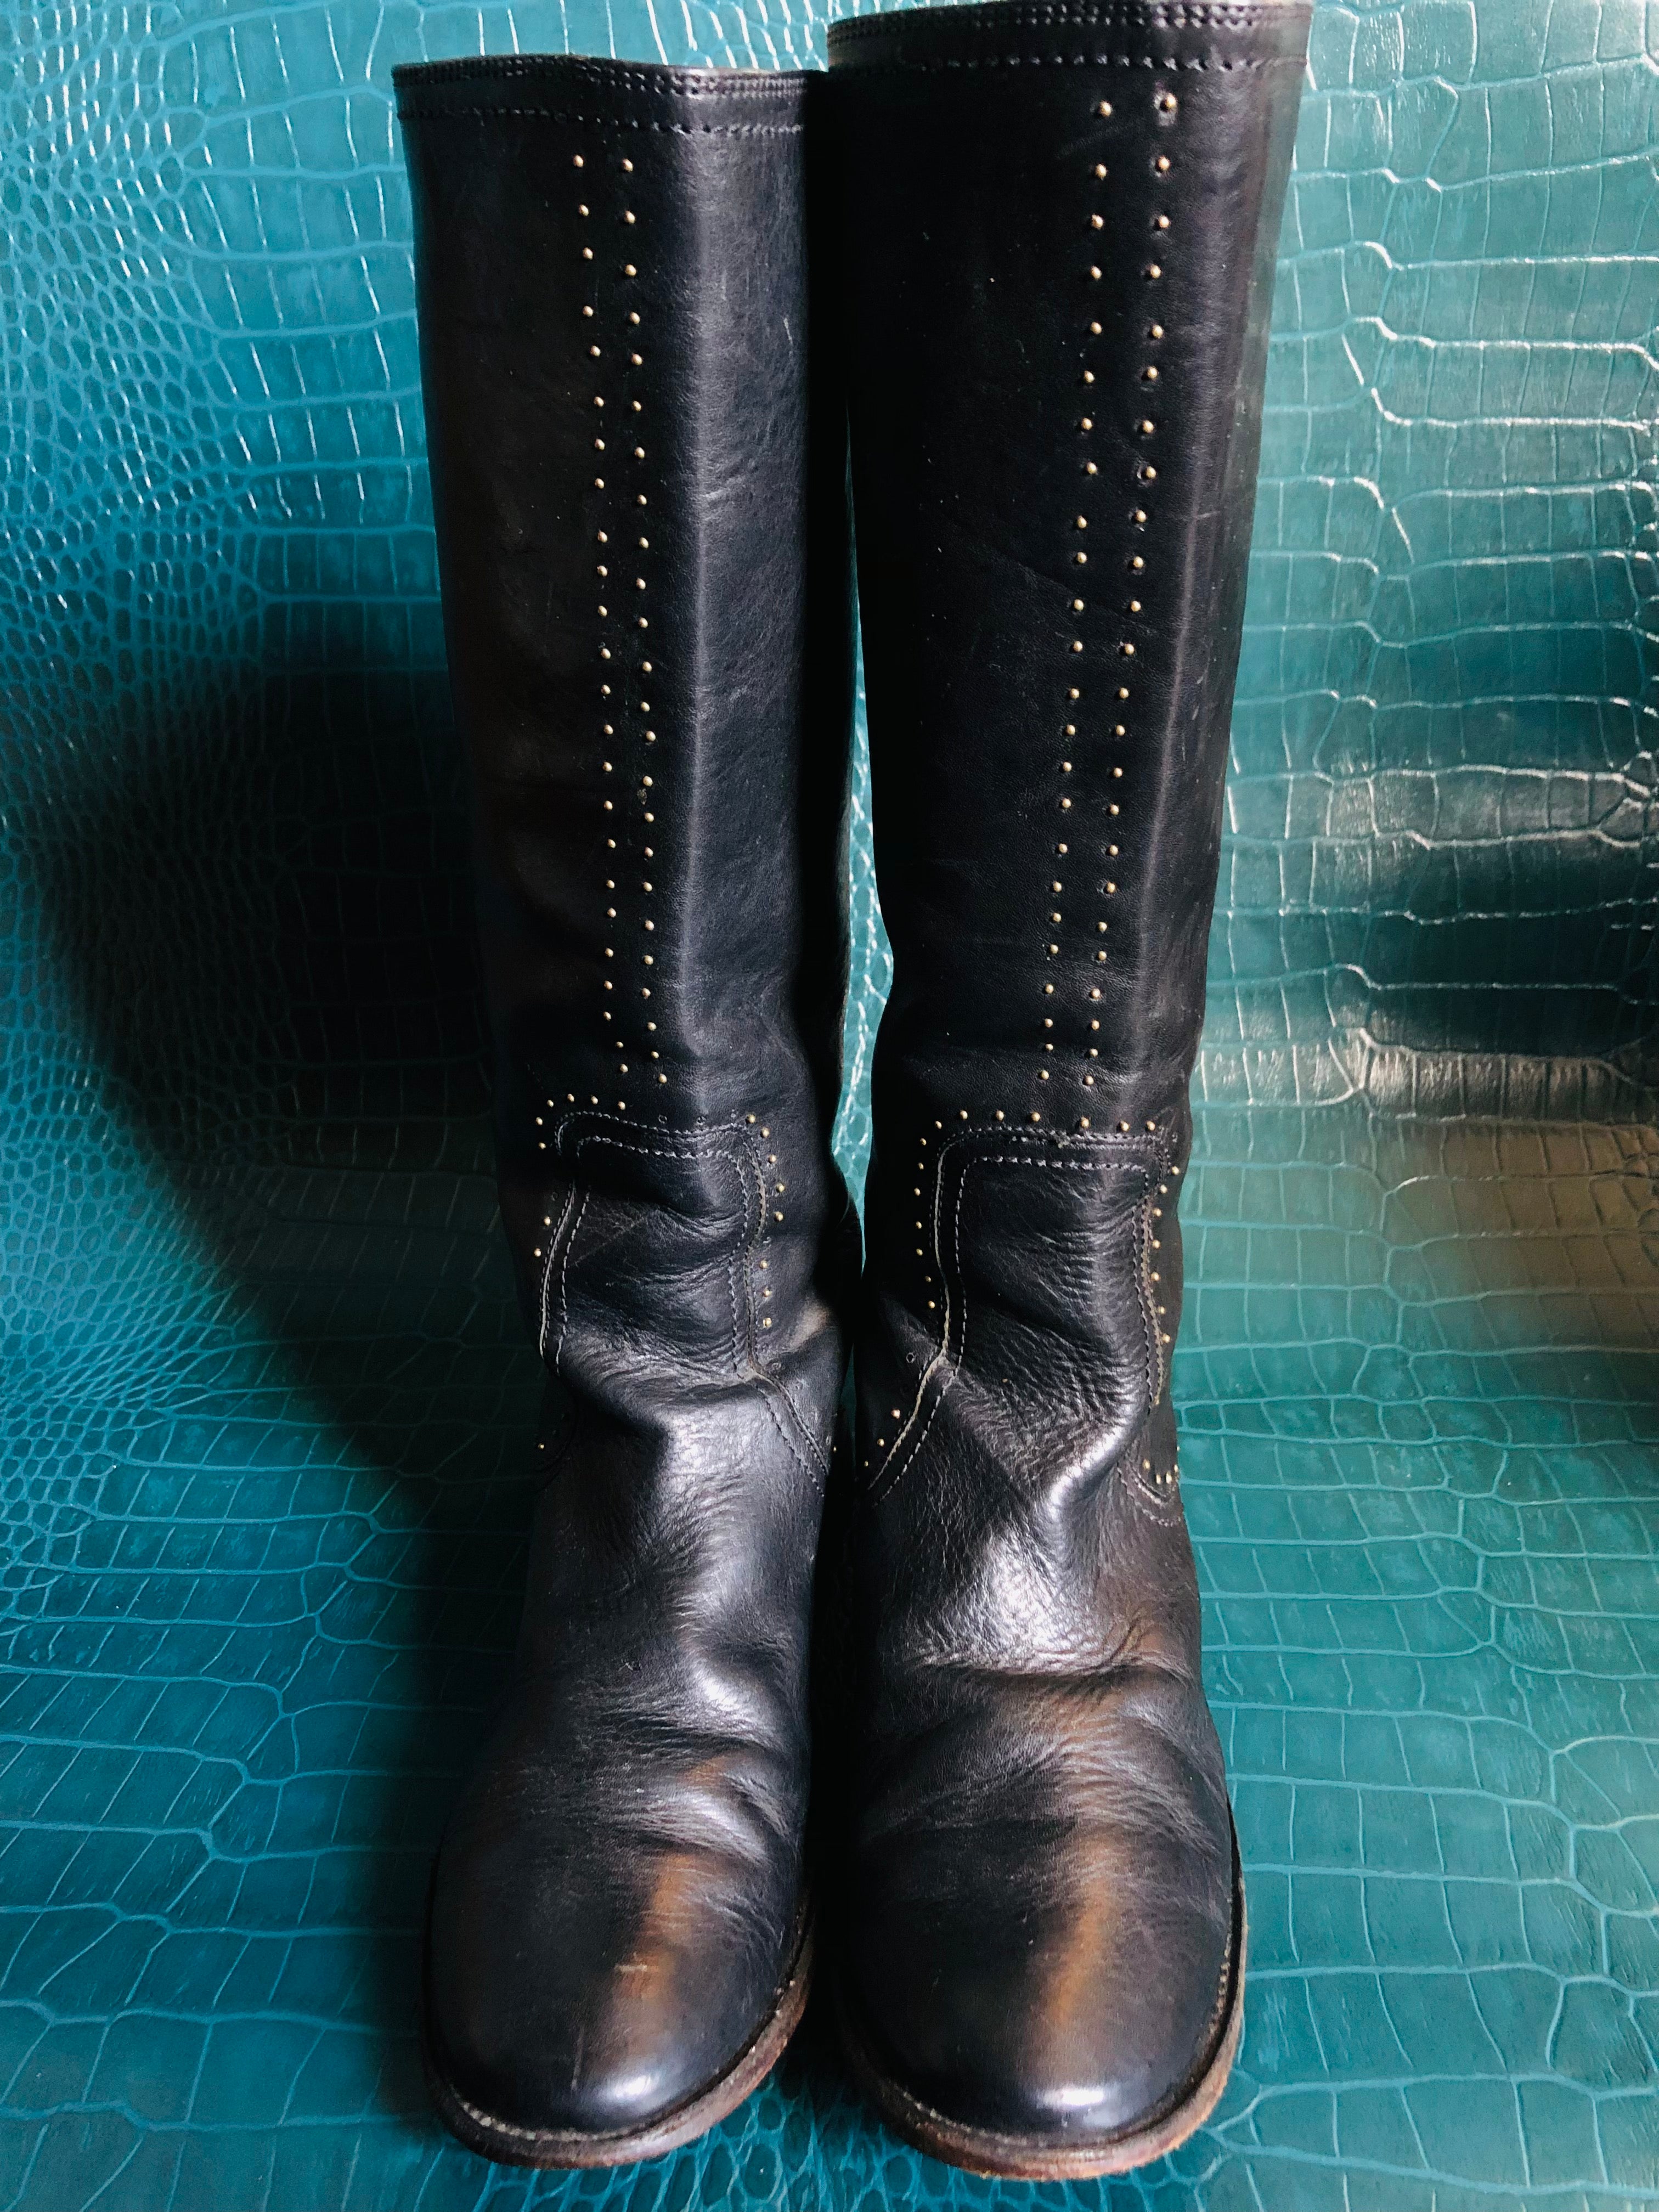 Frye Studded Black Leather Riding Boots Women’s 8.5